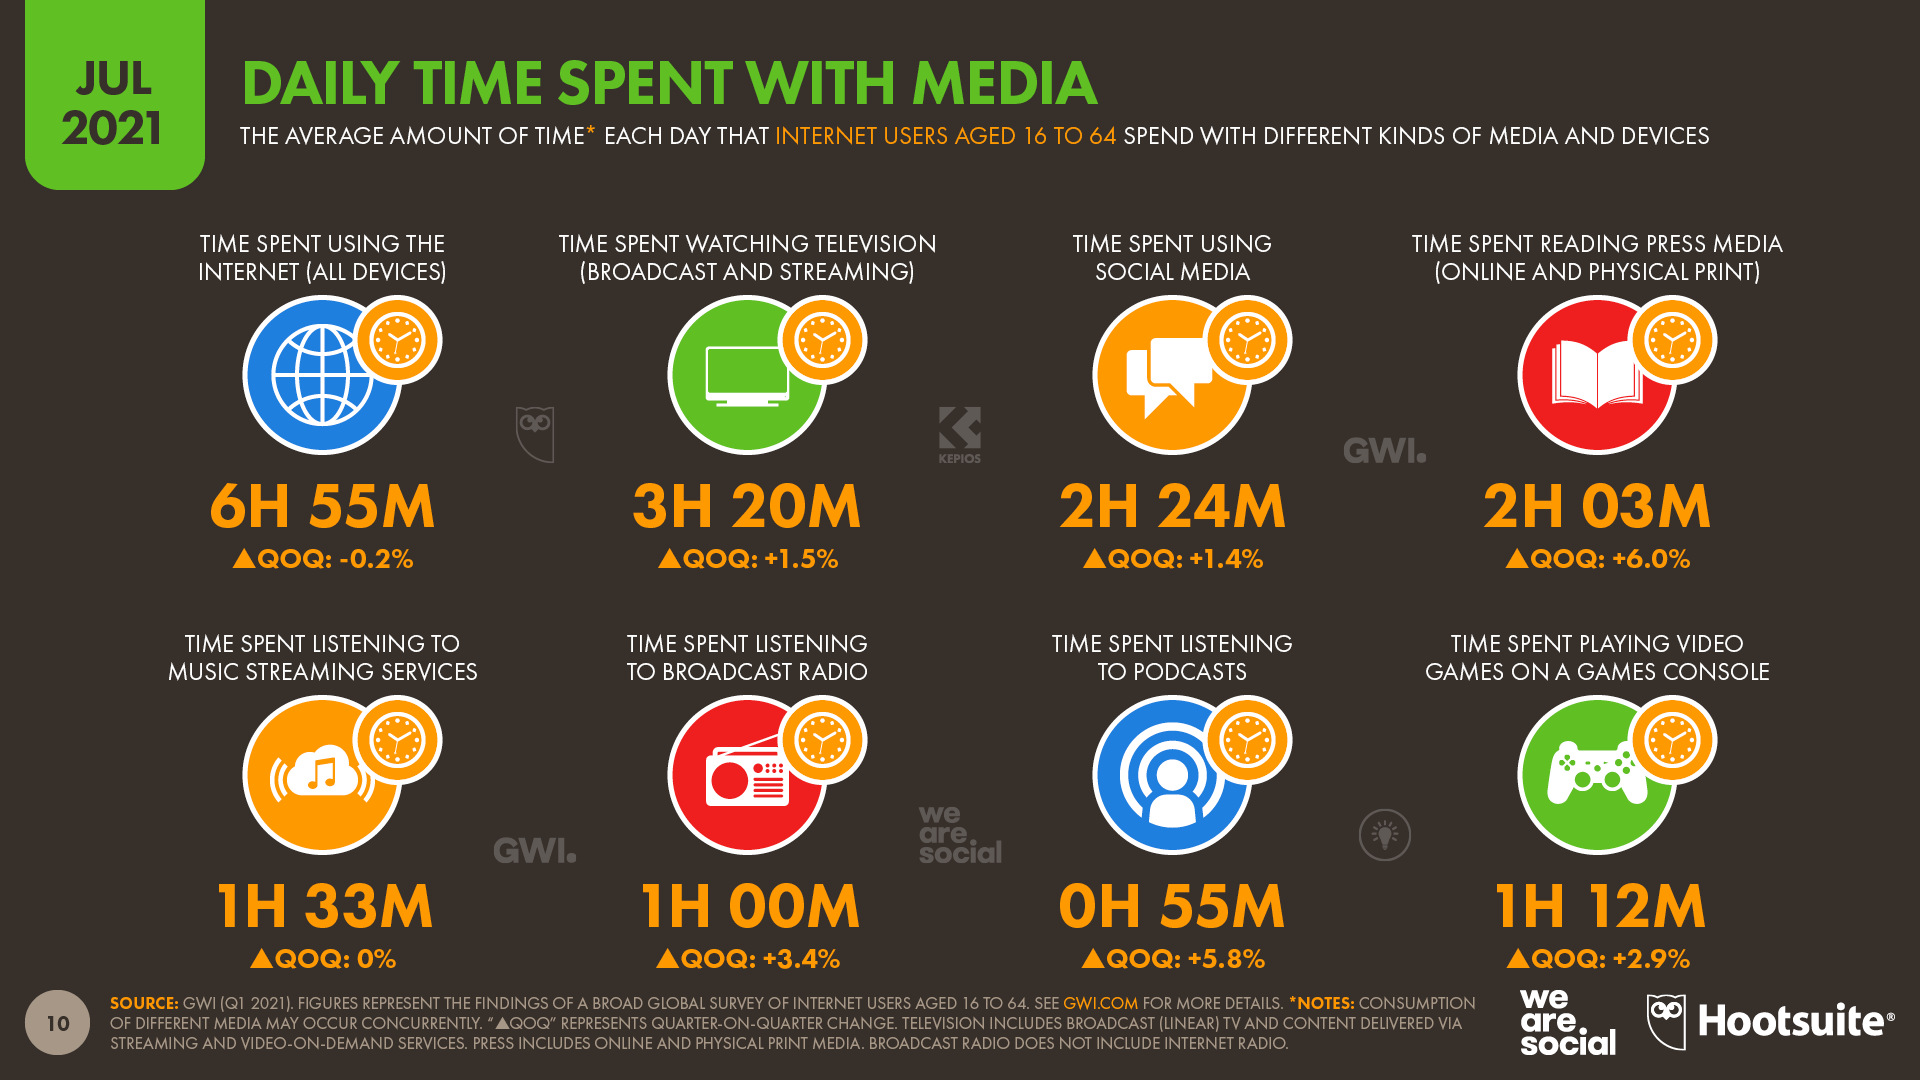 chart showing daily time spent with media as of July 2021